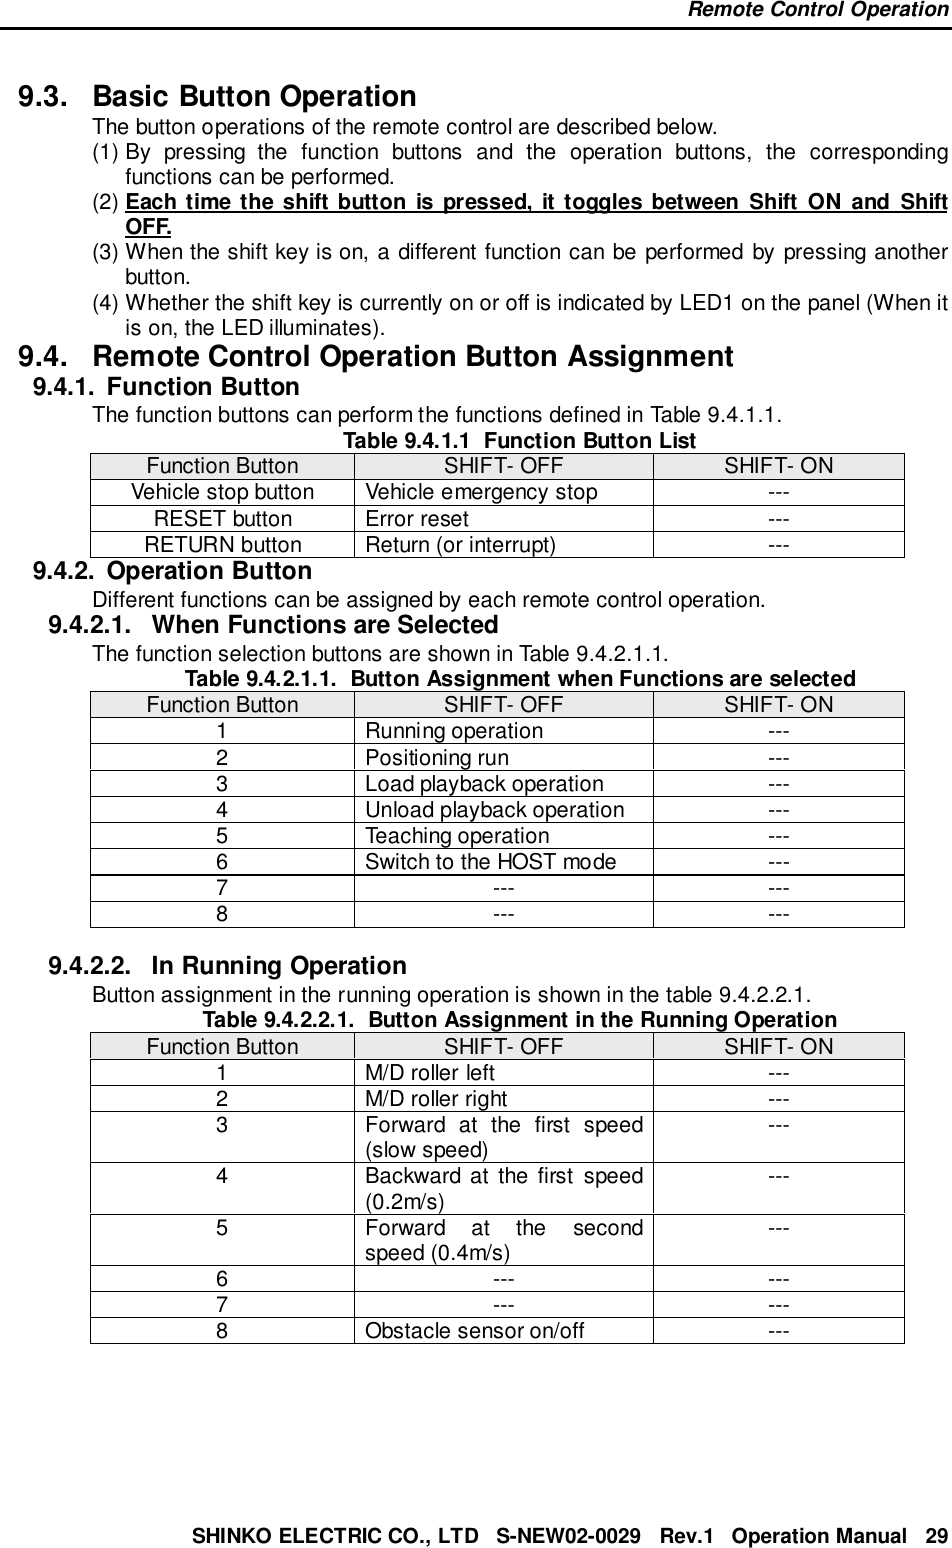 Remote Control OperationSHINKO ELECTRIC CO., LTD   S-NEW02-0029   Rev.1   Operation Manual   299.3. Basic Button OperationThe button operations of the remote control are described below.(1) By pressing the function buttons and the operation buttons, the correspondingfunctions can be performed.(2) Each time the shift button is pressed, it toggles between Shift ON and ShiftOFF.(3) When the shift key is on, a different function can be performed by pressing anotherbutton.(4) Whether the shift key is currently on or off is indicated by LED1 on the panel (When itis on, the LED illuminates).9.4.  Remote Control Operation Button Assignment9.4.1. Function ButtonThe function buttons can perform the functions defined in Table 9.4.1.1.Table 9.4.1.1  Function Button ListFunction Button SHIFT- OFF SHIFT- ONVehicle stop button Vehicle emergency stop ---RESET button Error reset ---RETURN button Return (or interrupt) ---9.4.2. Operation ButtonDifferent functions can be assigned by each remote control operation.9.4.2.1.  When Functions are SelectedThe function selection buttons are shown in Table 9.4.2.1.1.Table 9.4.2.1.1.  Button Assignment when Functions are selectedFunction Button SHIFT- OFF SHIFT- ON1 Running operation ---2 Positioning run ---3 Load playback operation ---4 Unload playback operation ---5 Teaching operation ---6 Switch to the HOST mode ---7 --- ---8 --- ---9.4.2.2.  In Running OperationButton assignment in the running operation is shown in the table 9.4.2.2.1.Table 9.4.2.2.1.  Button Assignment in the Running OperationFunction Button SHIFT- OFF SHIFT- ON1 M/D roller left ---2 M/D roller right ---3 Forward at the first speed(slow speed) ---4 Backward at the first speed(0.2m/s) ---5 Forward at the secondspeed (0.4m/s) ---6 --- ---7 --- ---8 Obstacle sensor on/off ---